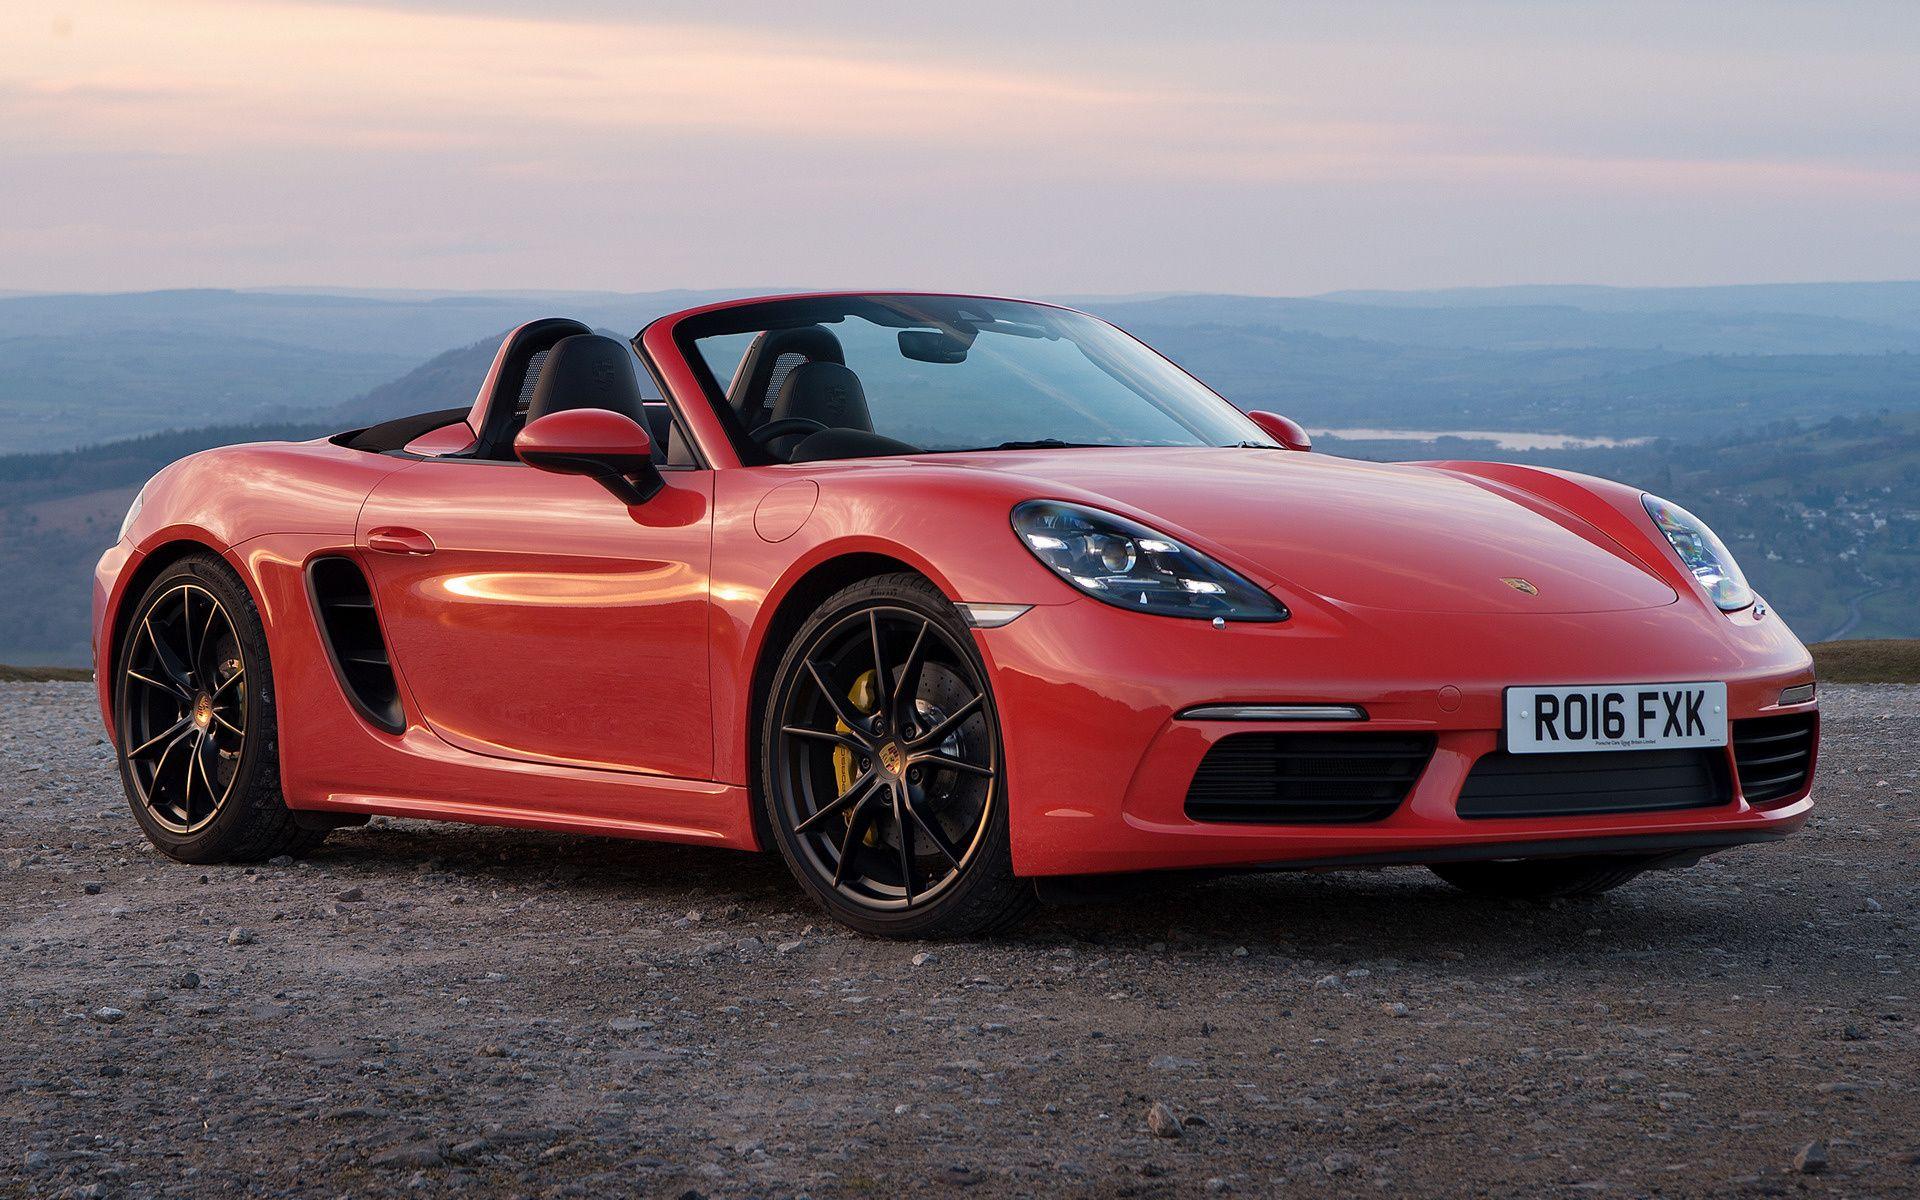 Porsche 718 Boxster S (2016) UK Wallpaper and HD Image